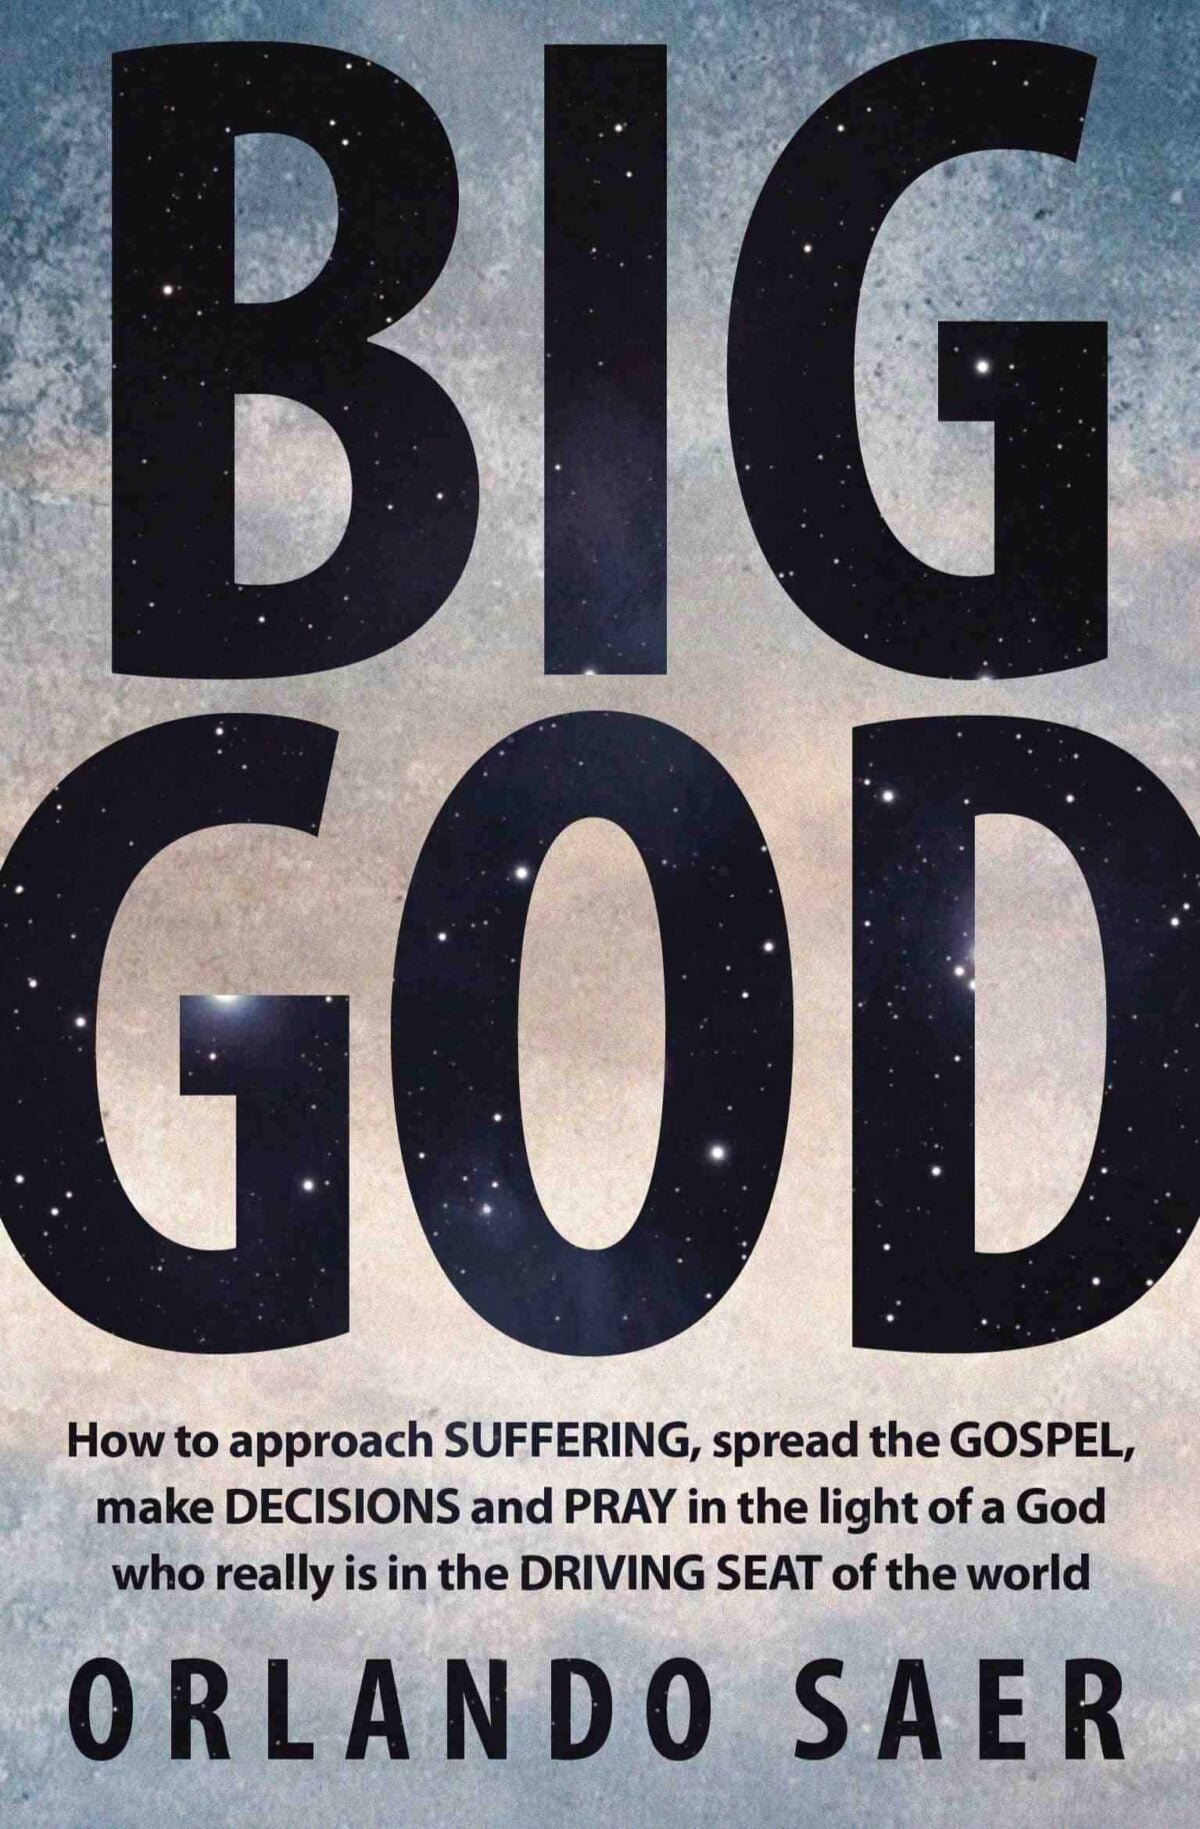 Big God: How to approach suffering, spread the gospel, make decisions and pray in the light of a God who really is in the driving seat of the world